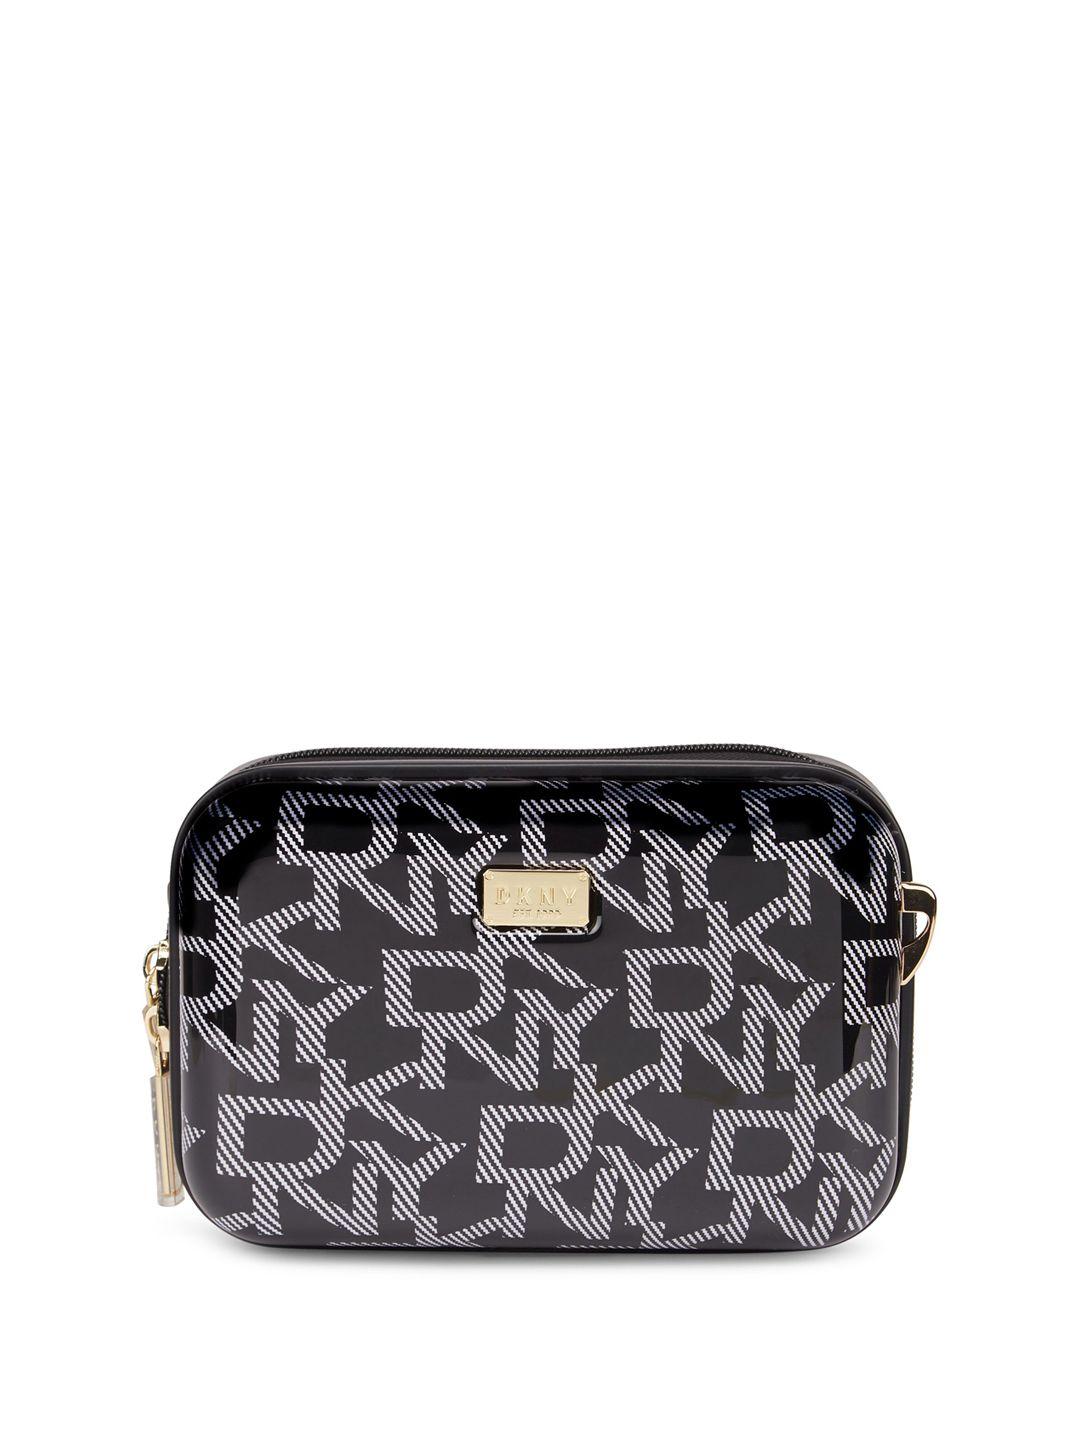 dkny abs hard beauty case makeup pouch